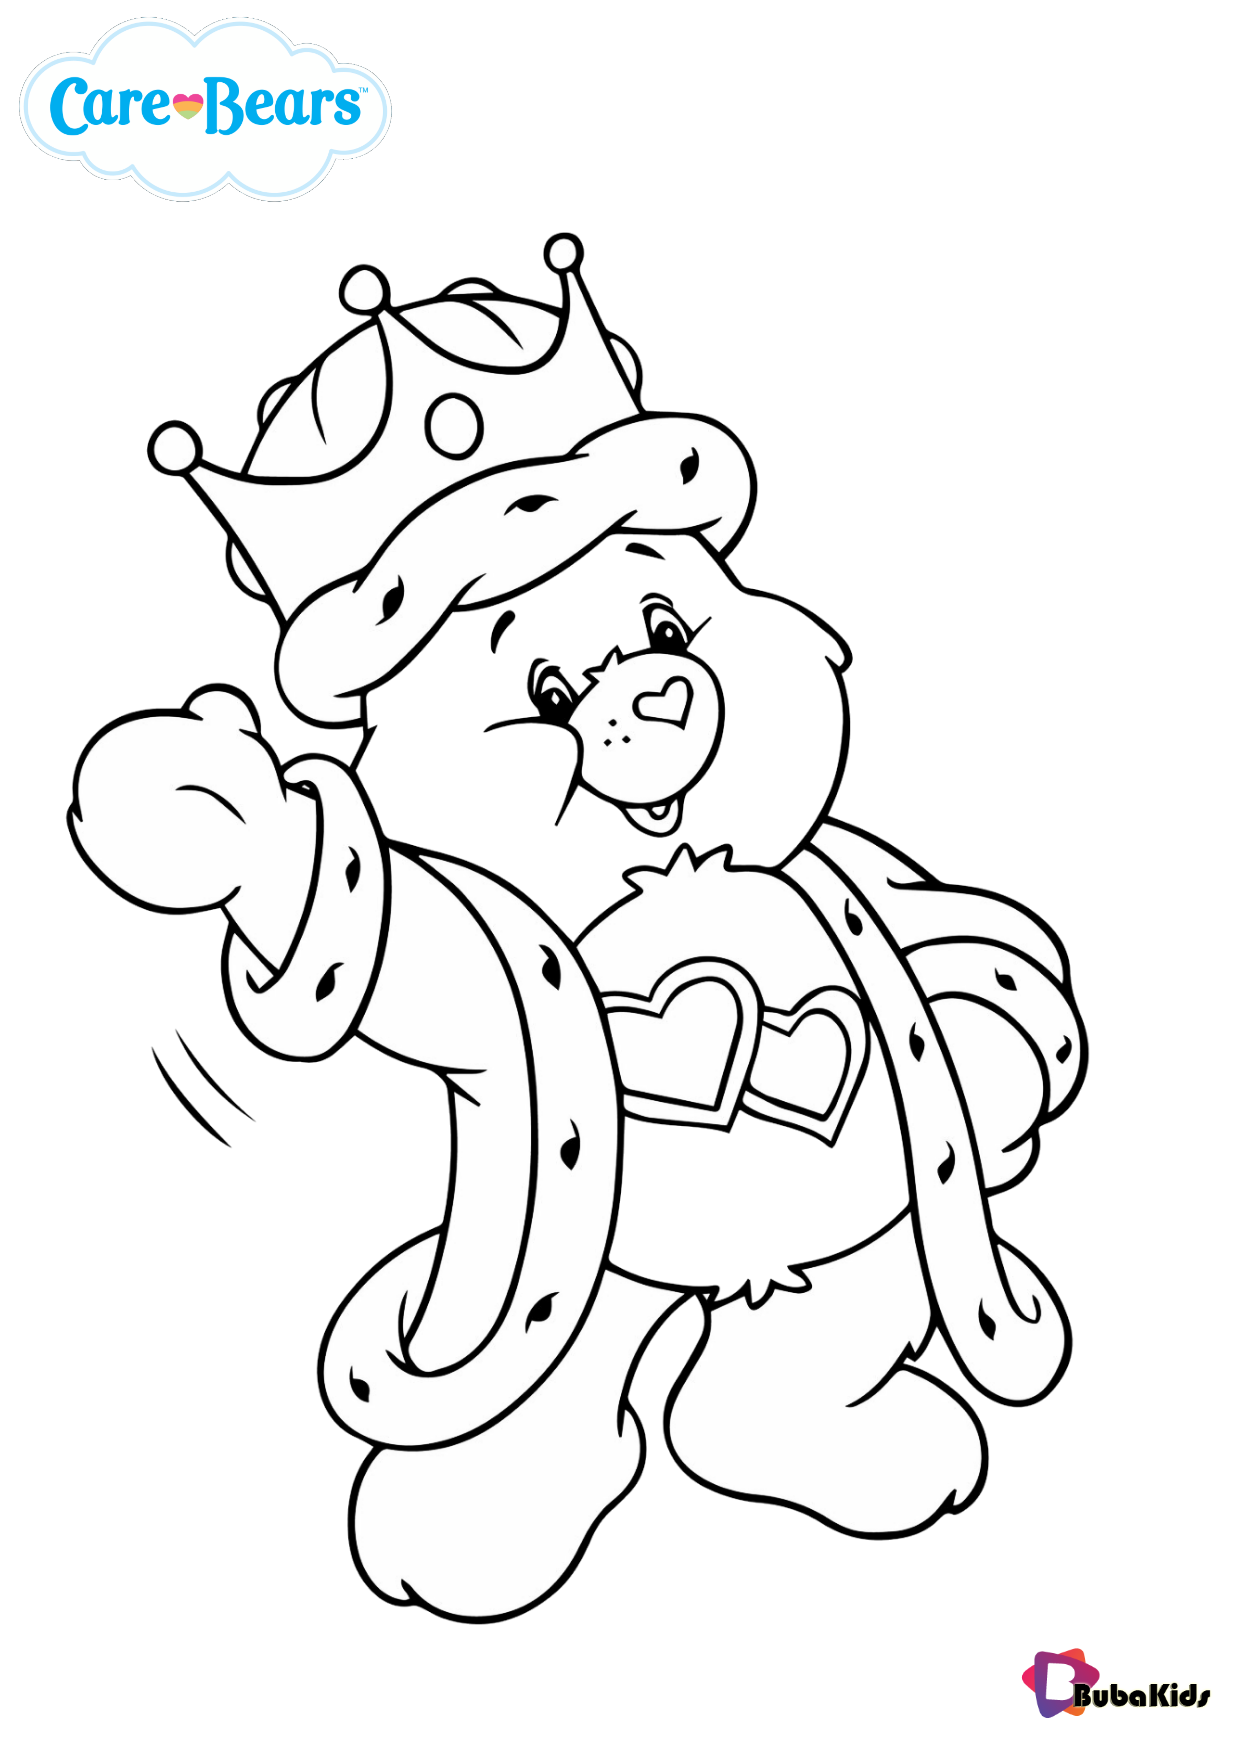 Care Bears Love-a-lot bear coloring pages Wallpaper